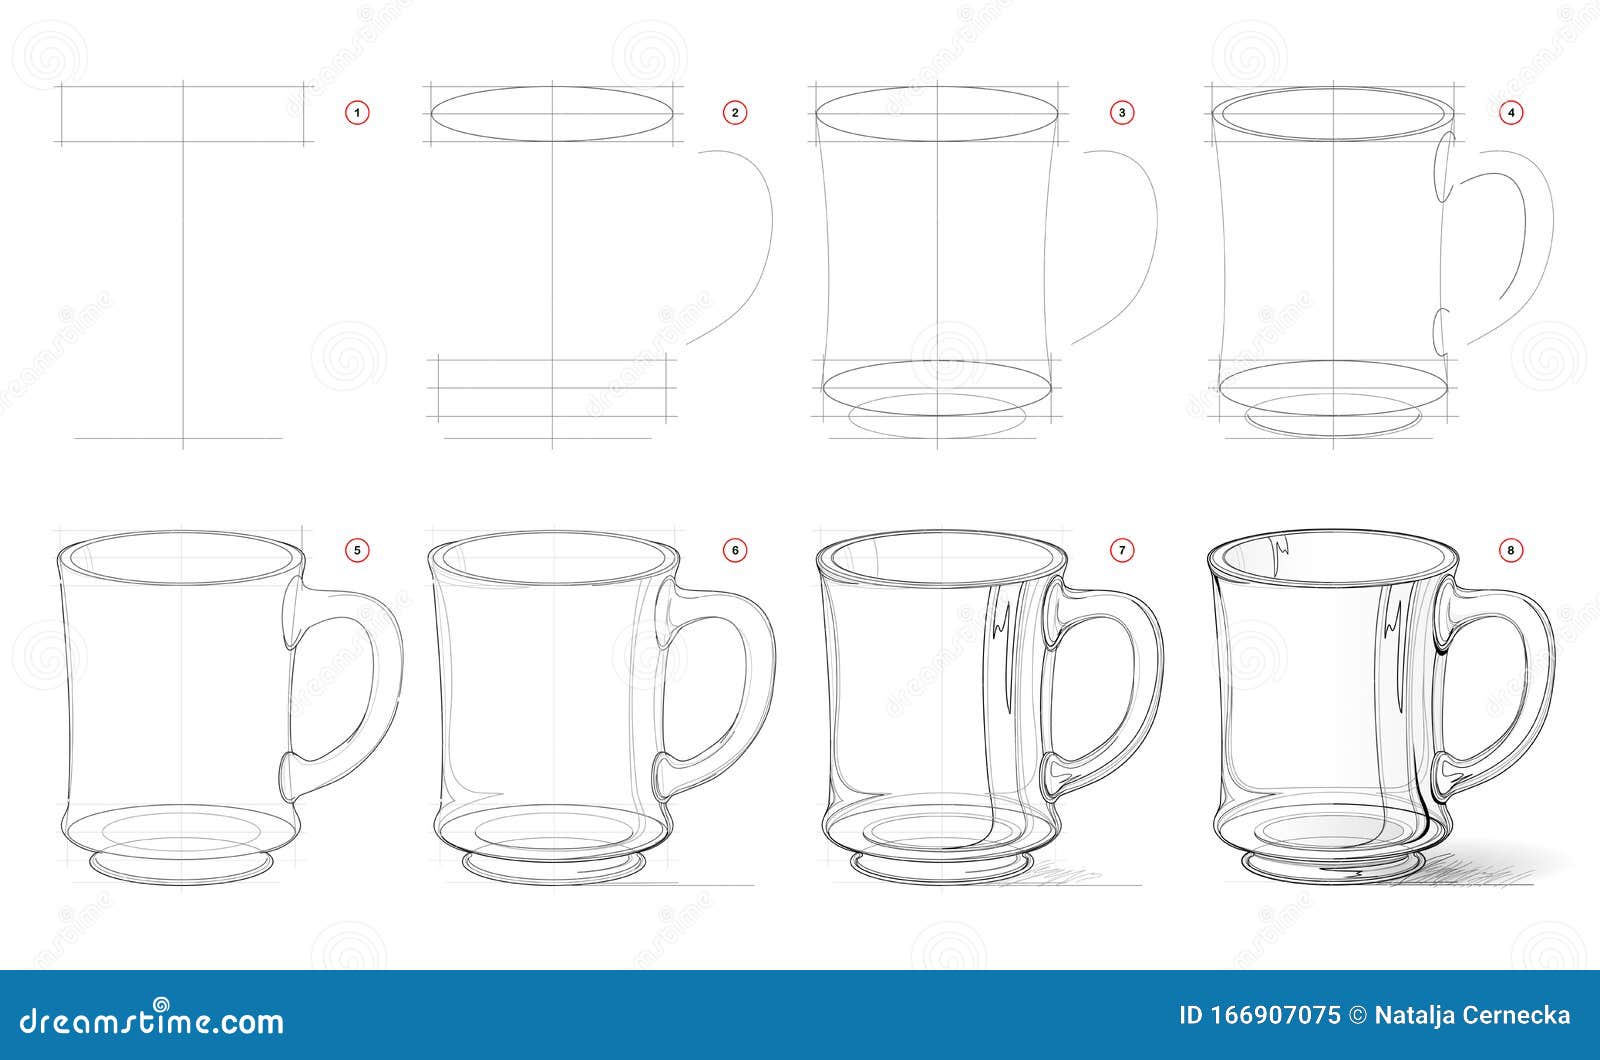 How to Draw a Cup and Saucer Step-by-Step for Beginners - YouTube